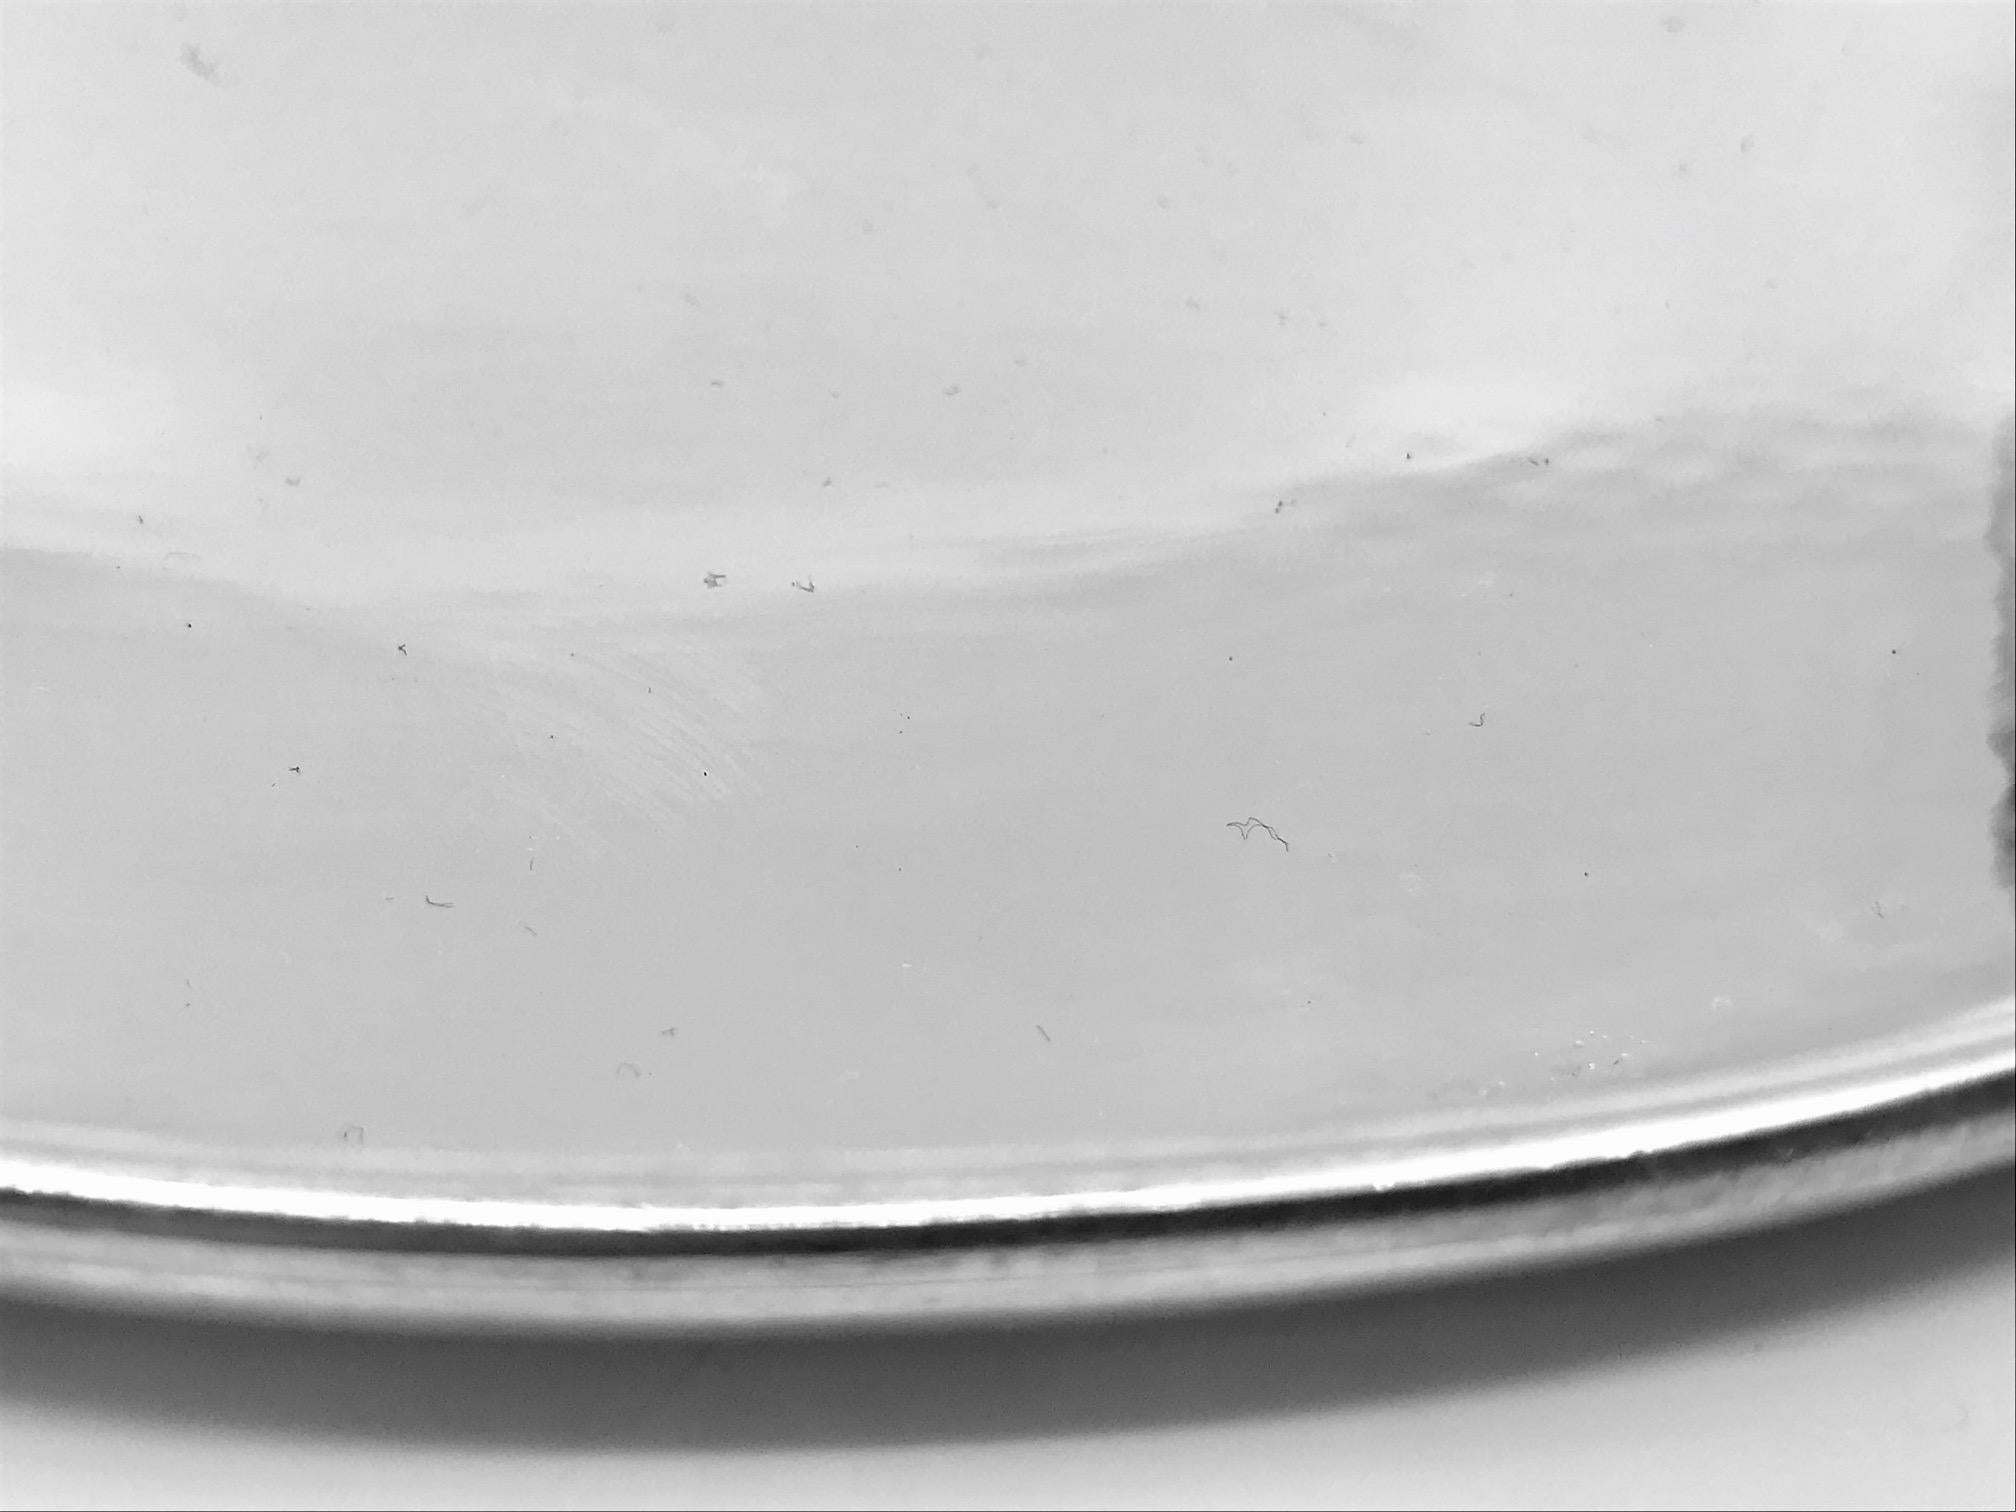 Vintage sterling silver Georg Jensen circular Blossom tray, design #2AB by Georg Jensen. The Blossom pattern goes back to 1905, when Georg Jensen designed the Blossom teapot, many other Blossom pieces followed.

Measures 13 3/4? across the